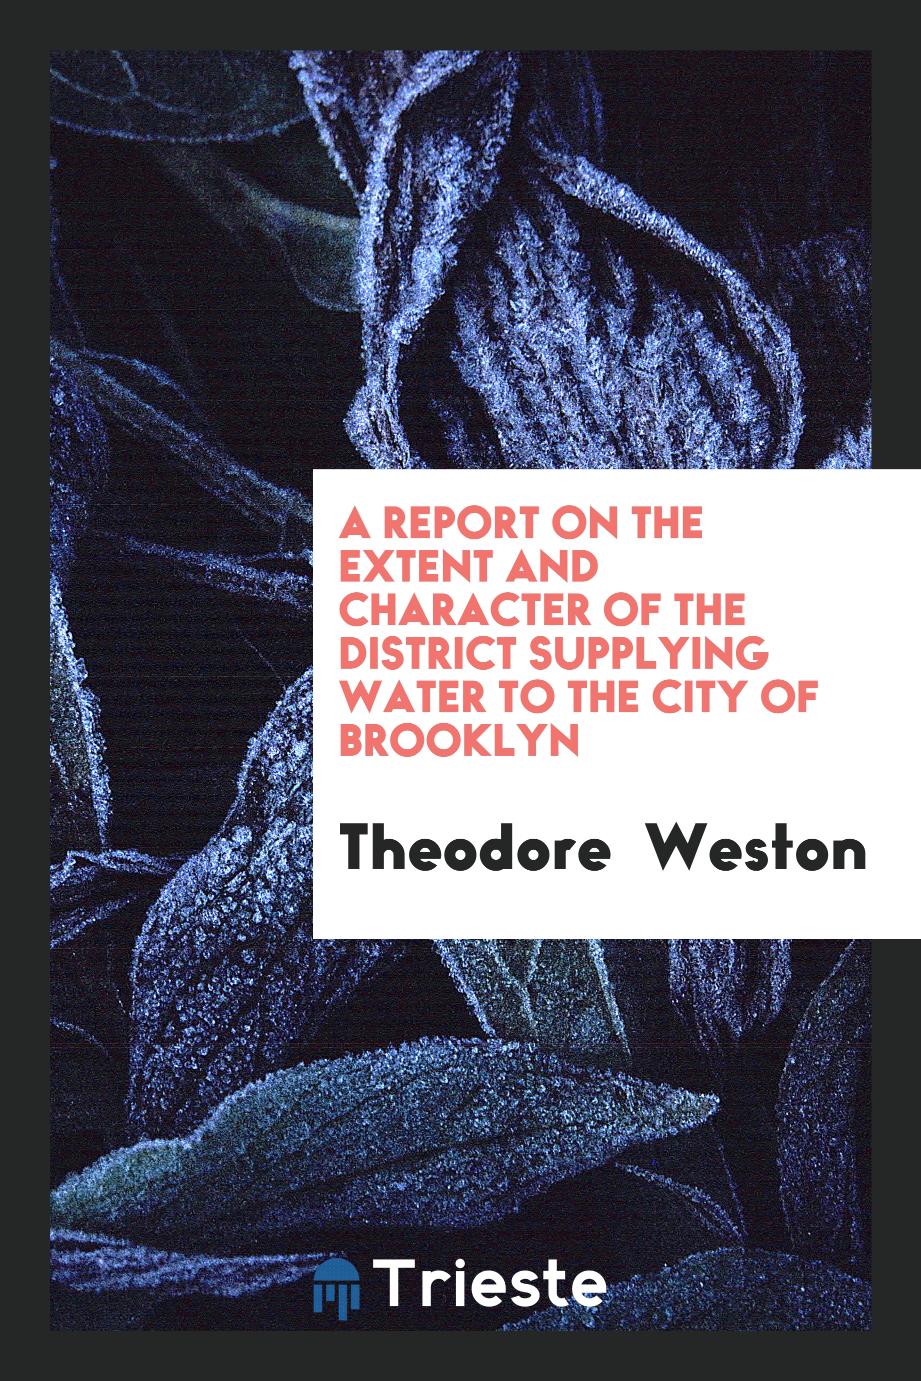 A Report on the Extent and Character of the District Supplying Water to the City of Brooklyn